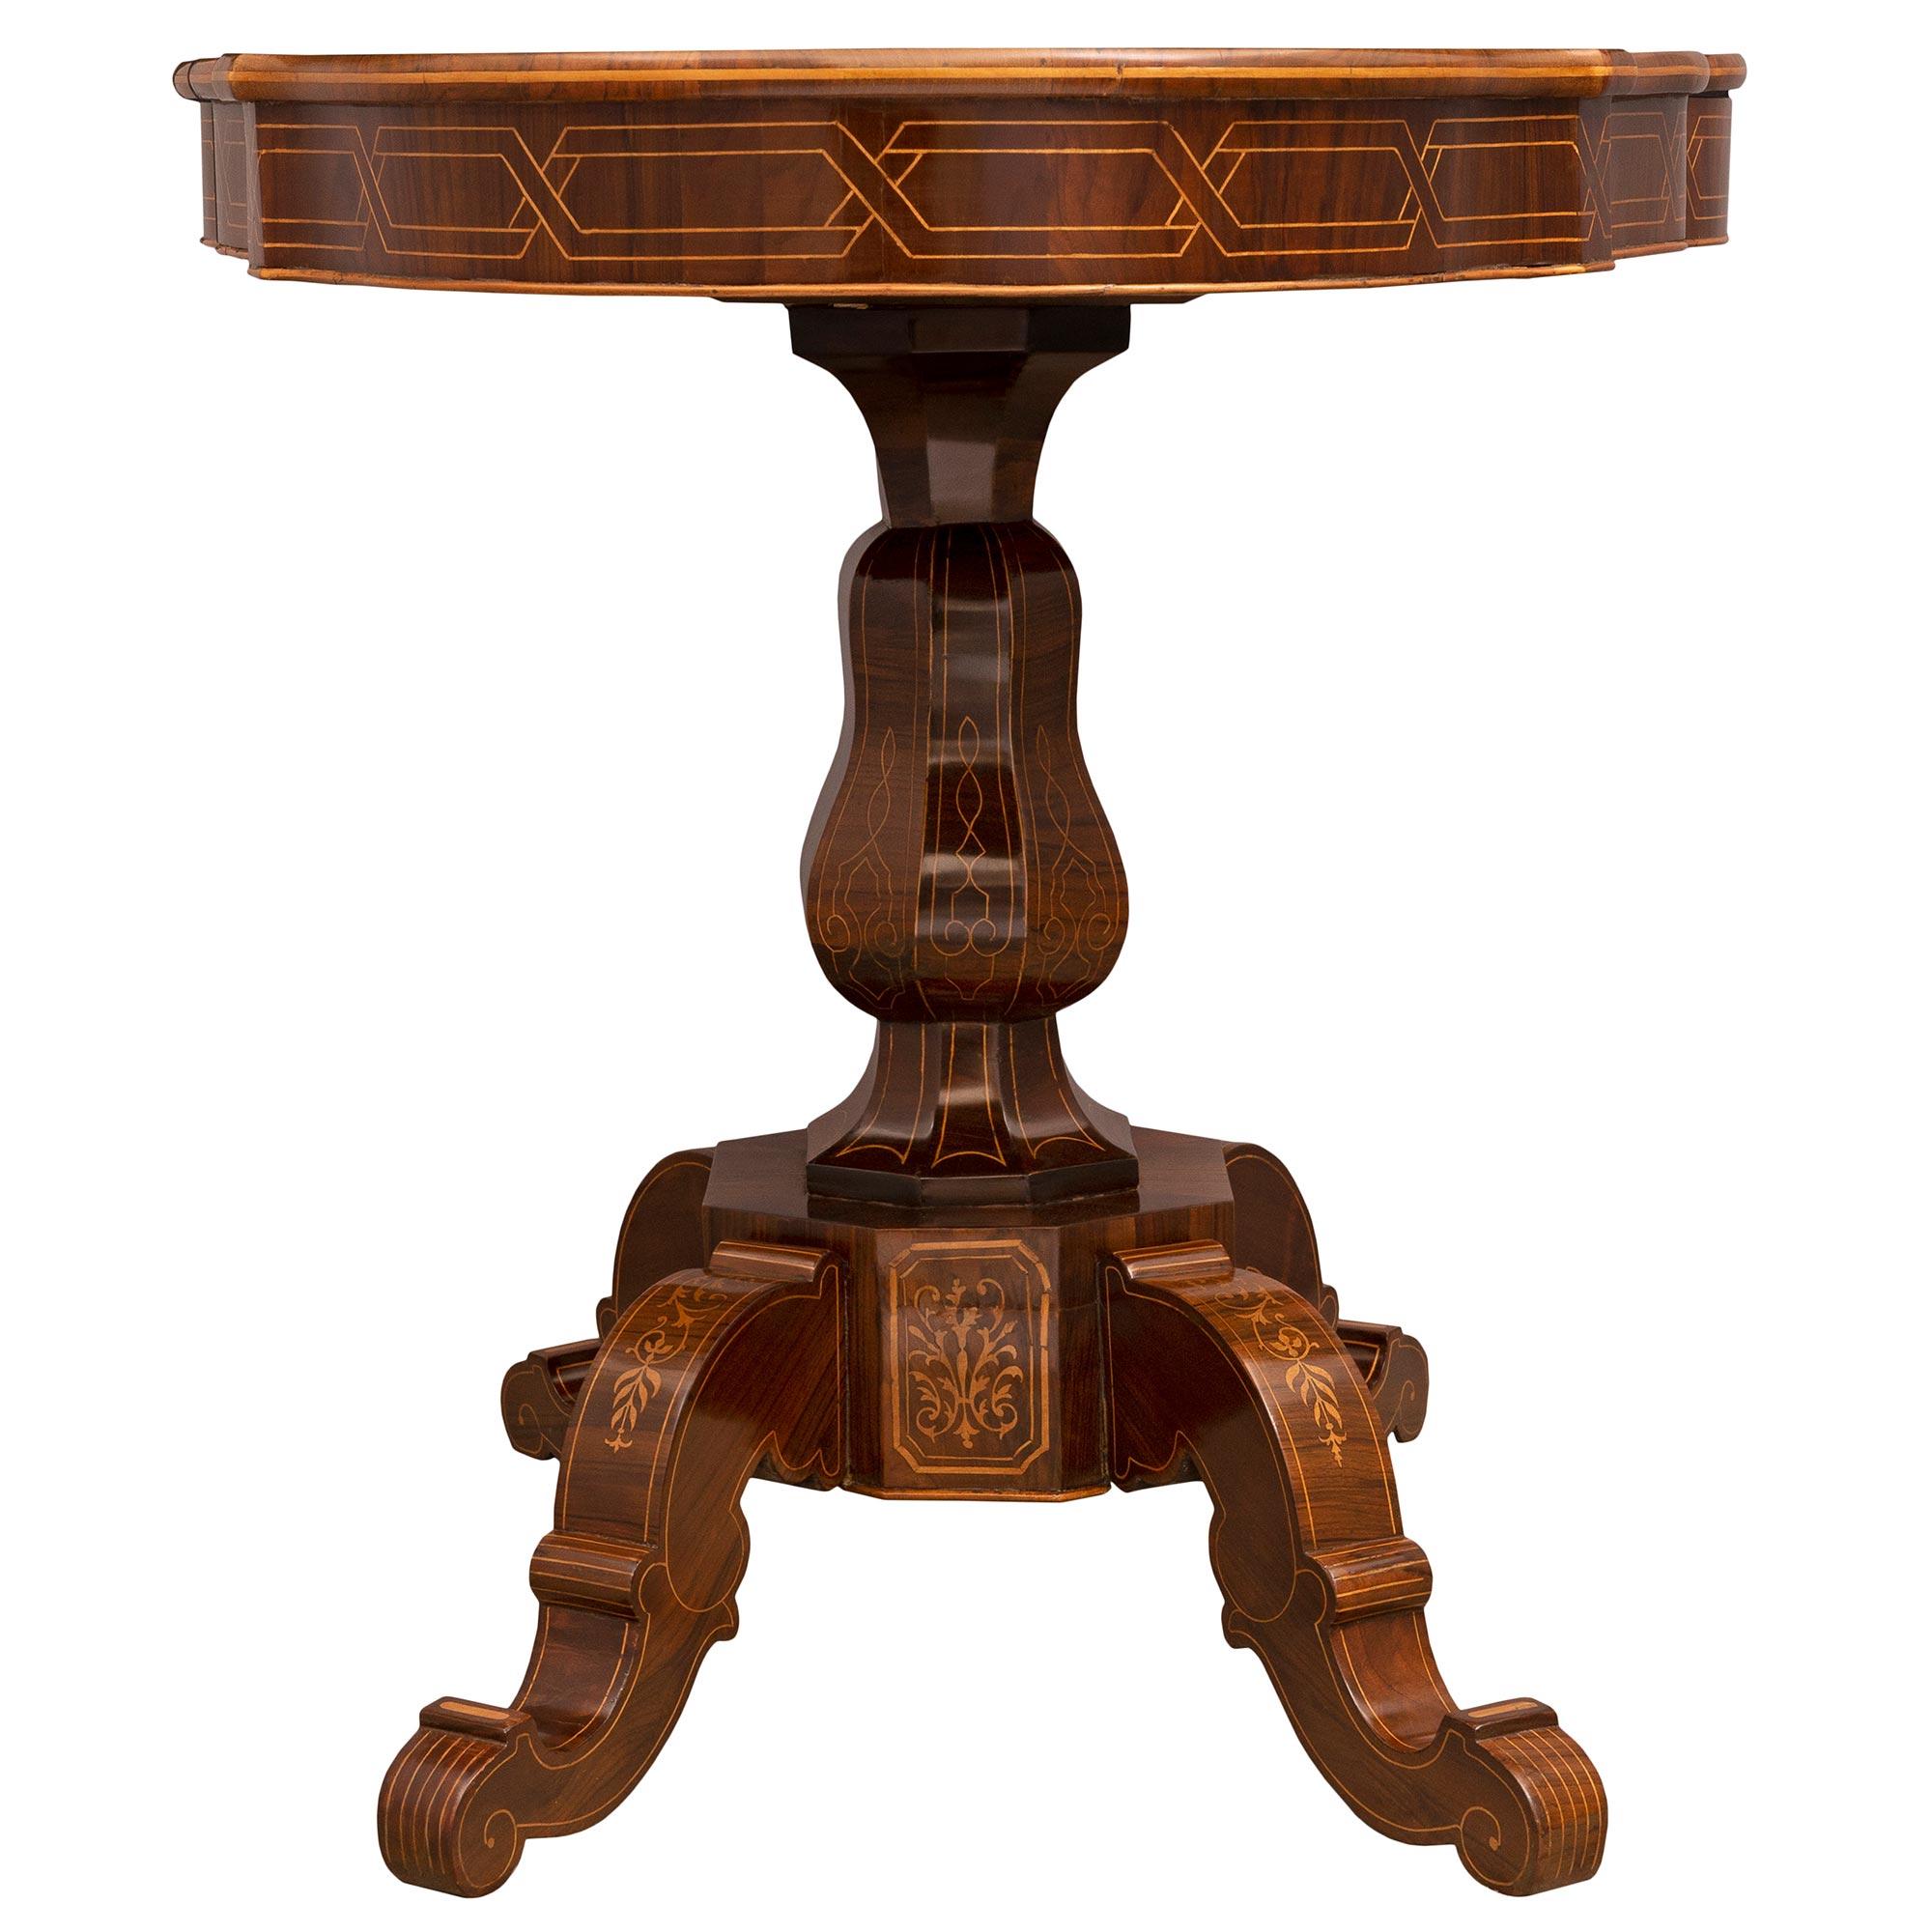 Italian 19th Century Charles X Period Walnut and Maplewood Inlaid Table For Sale 2